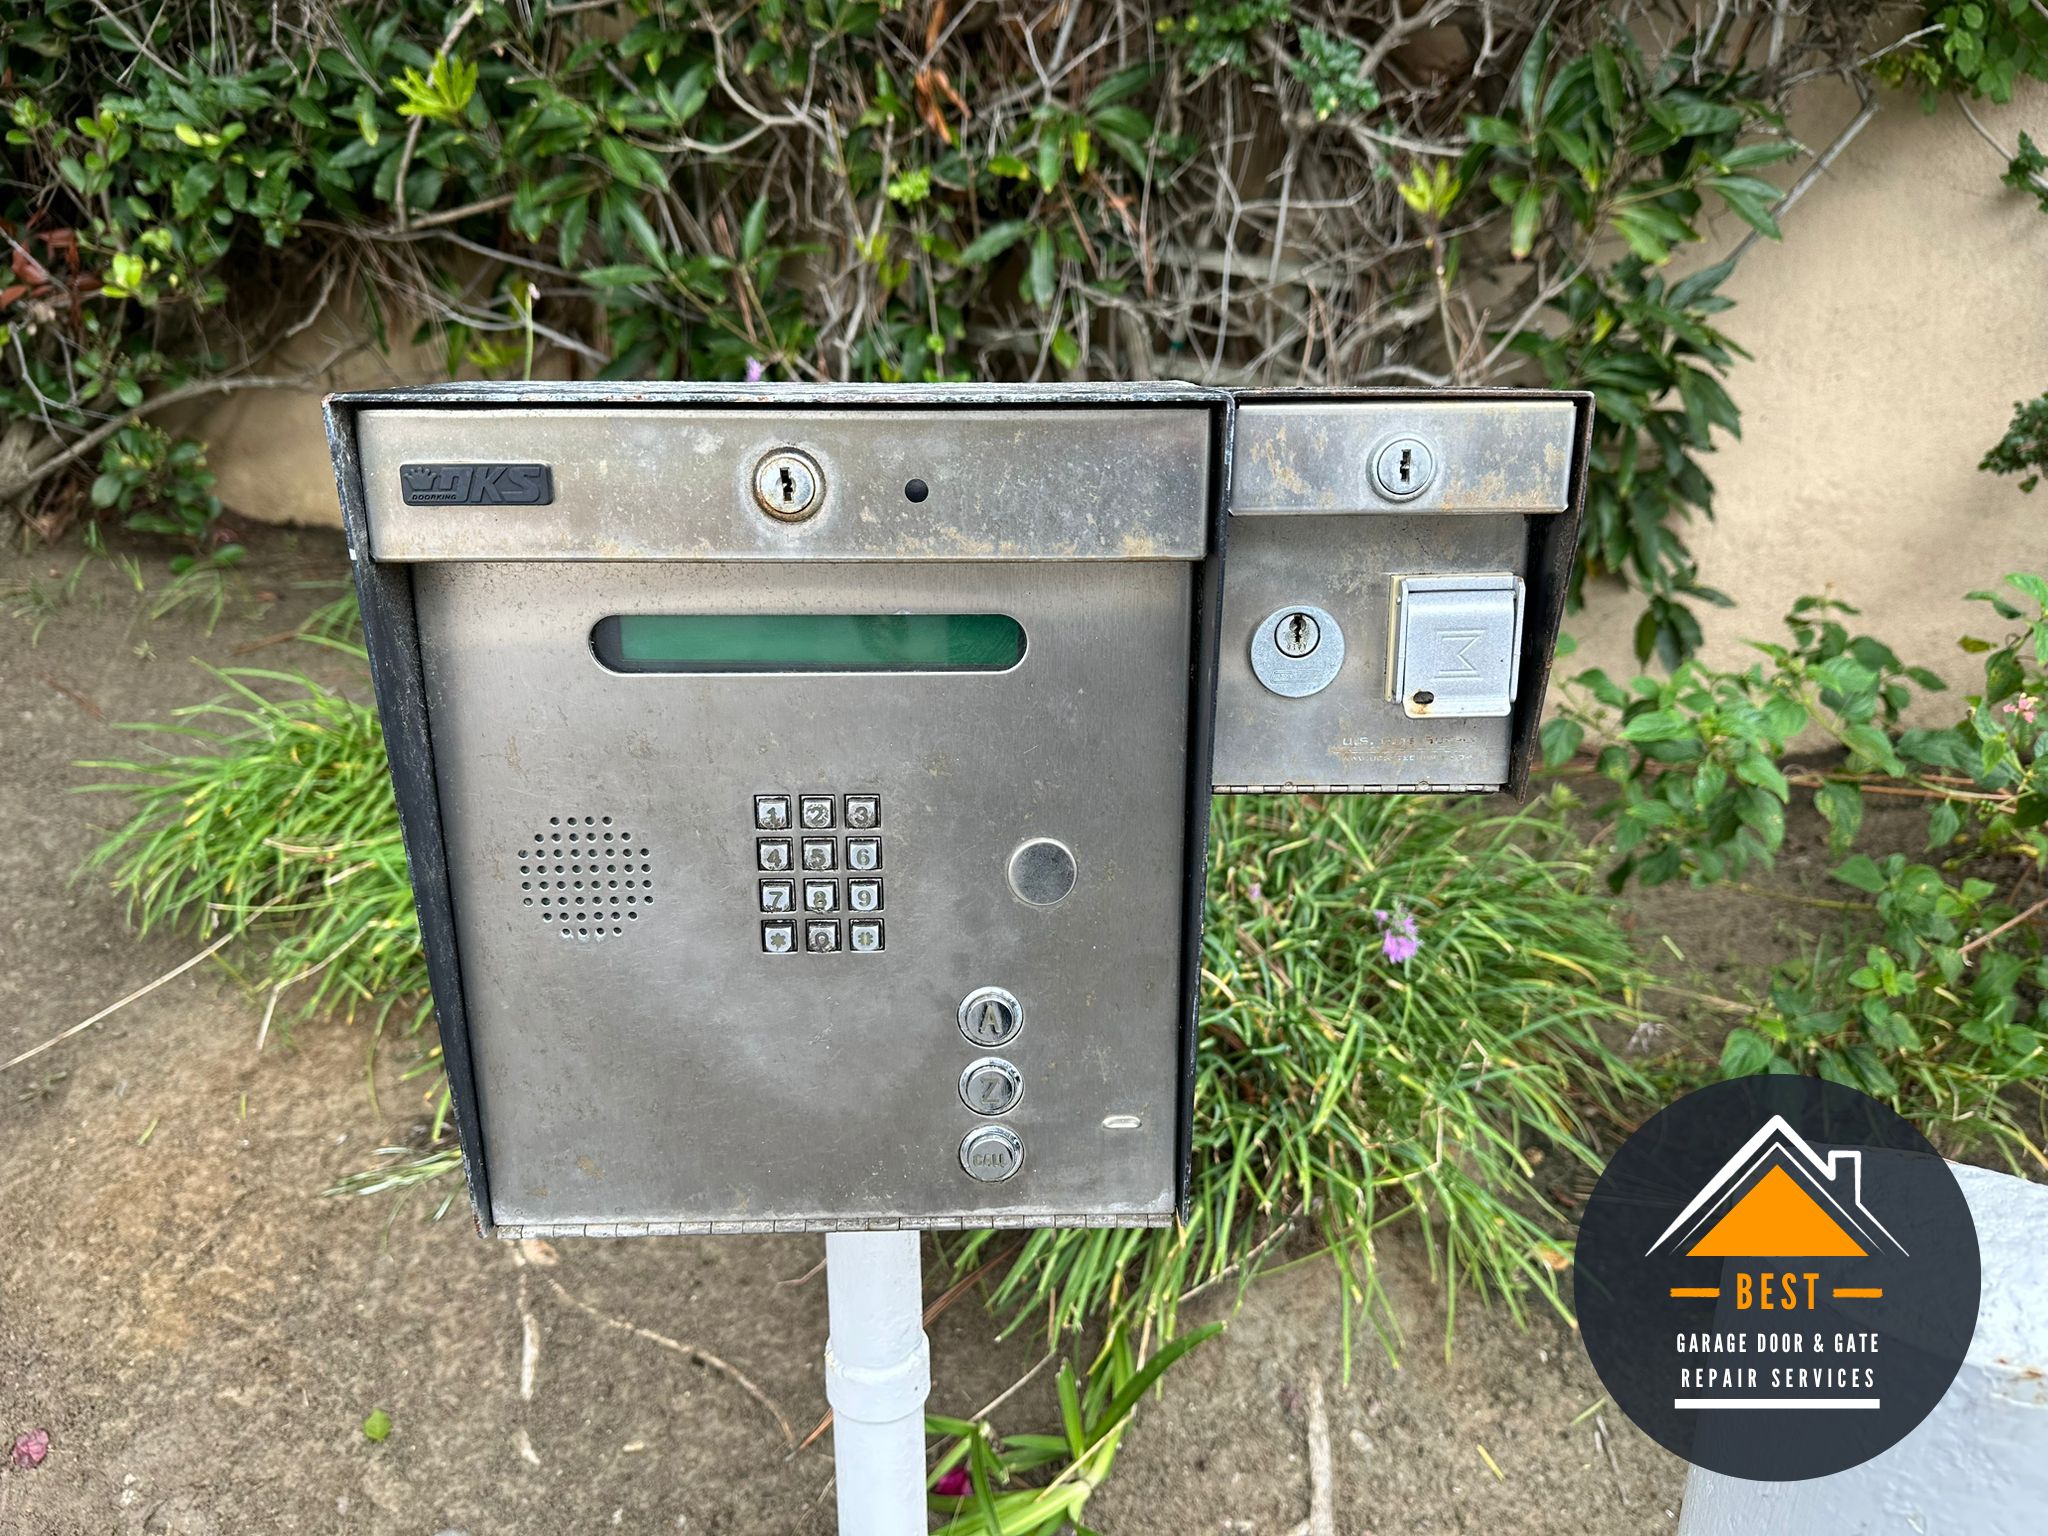 Bringing automatic gate system up to code to meet UL 325 universal codes. Replaced the DKS access control main board panel. Replaced exit and shadow loops with its loops detectors. Added new safety eyes sensors to ensure proper safety. Del Mar, CA 92014